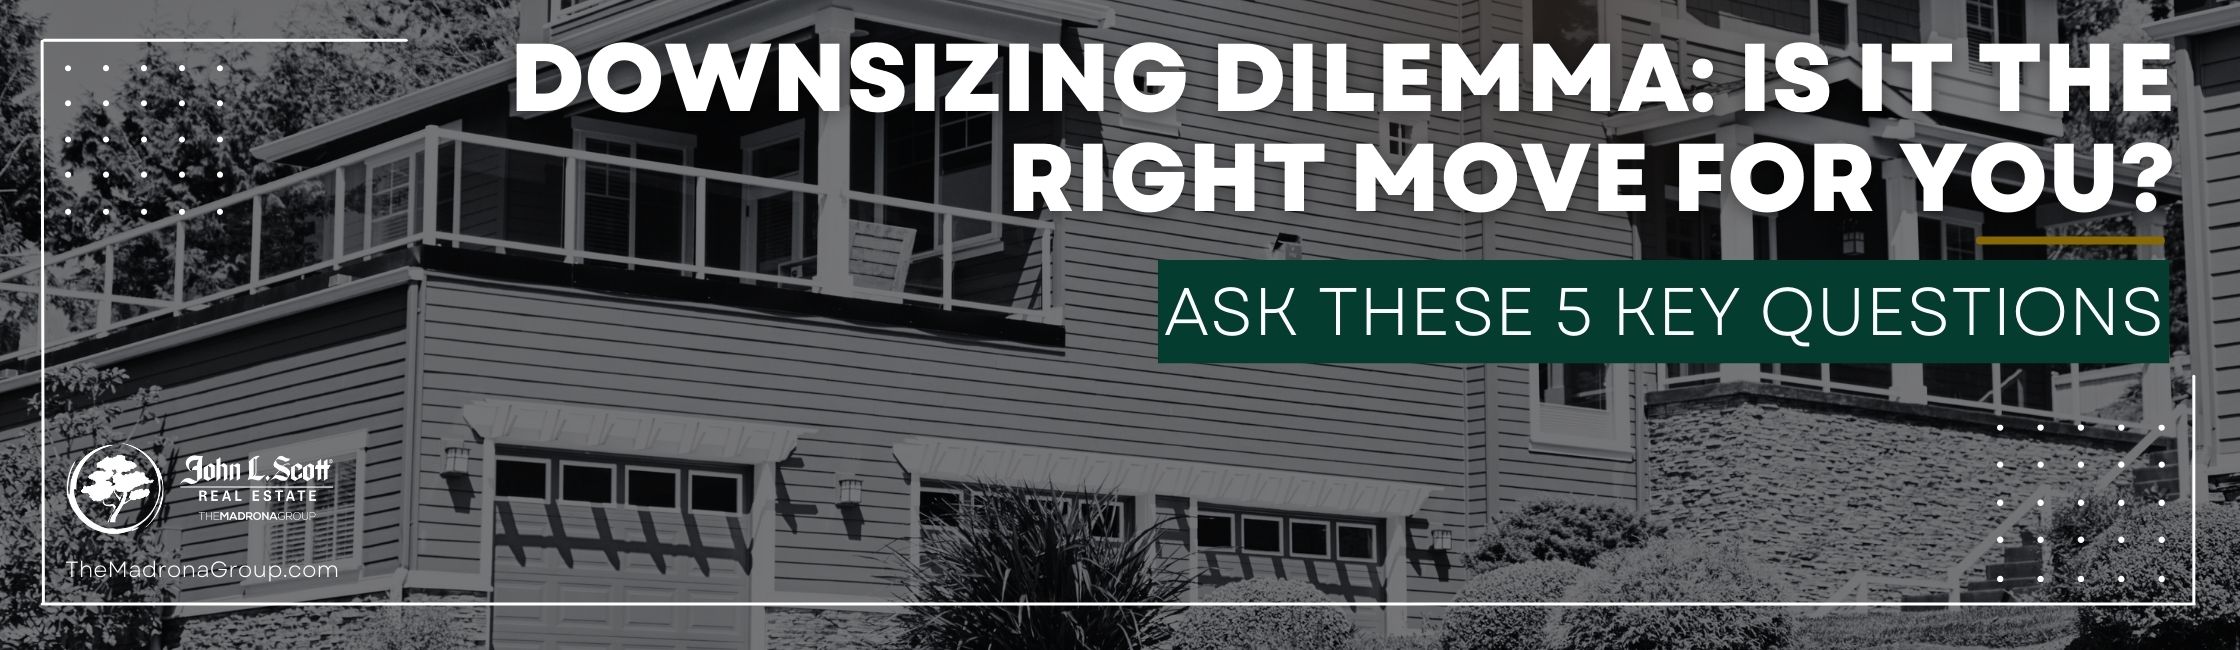 Downsizing Dilemma: Is It the Right Move for You? Ask These 5 Key Questions